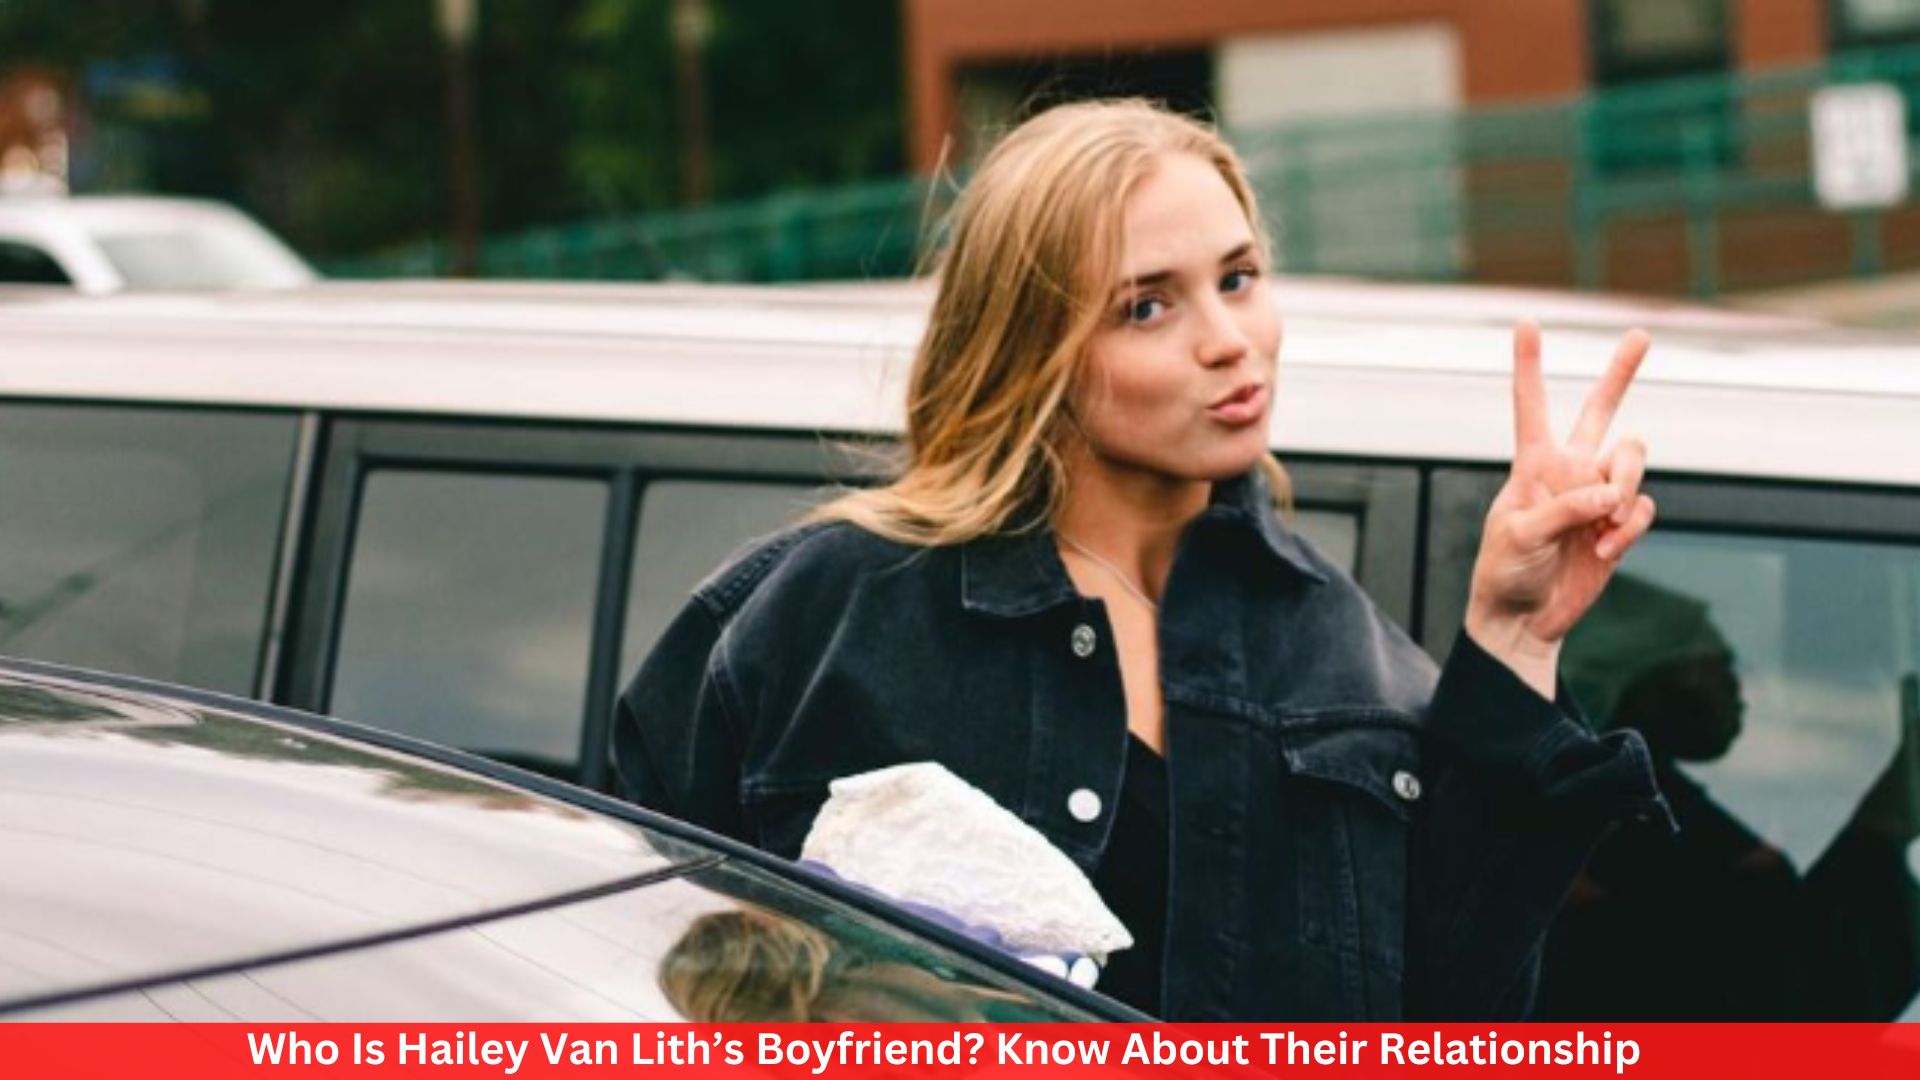 Who Is Hailey Van Lith’s Boyfriend? Know About Their Relationship